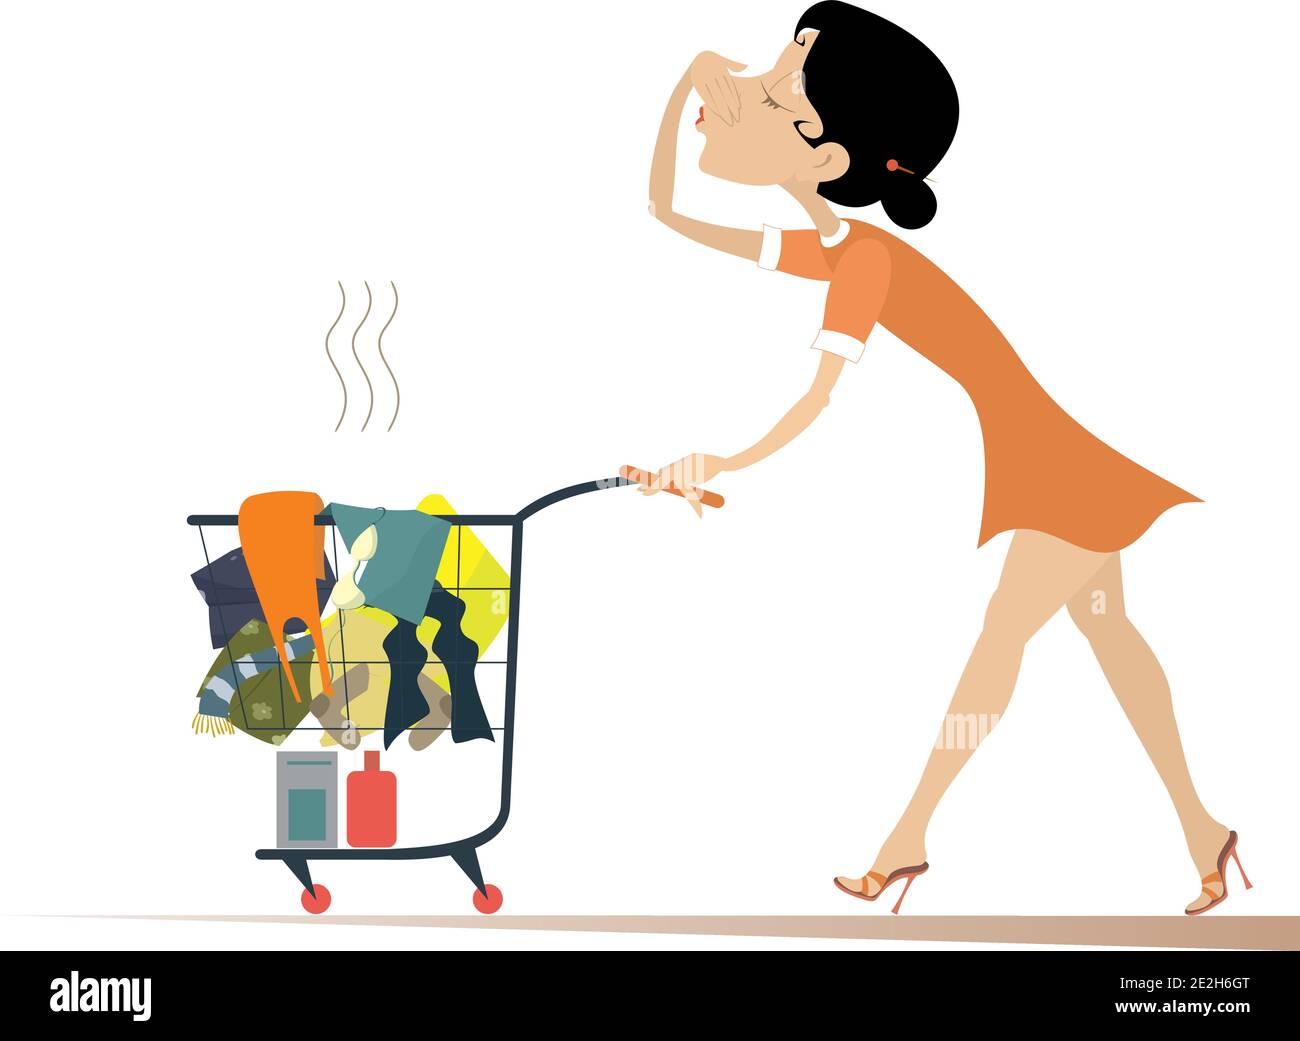 Woman with a trolley going to wash dirty laundry. Young woman moves a trolley with dirty laundry and holds her nose from odor nuisance isolated Stock Vector